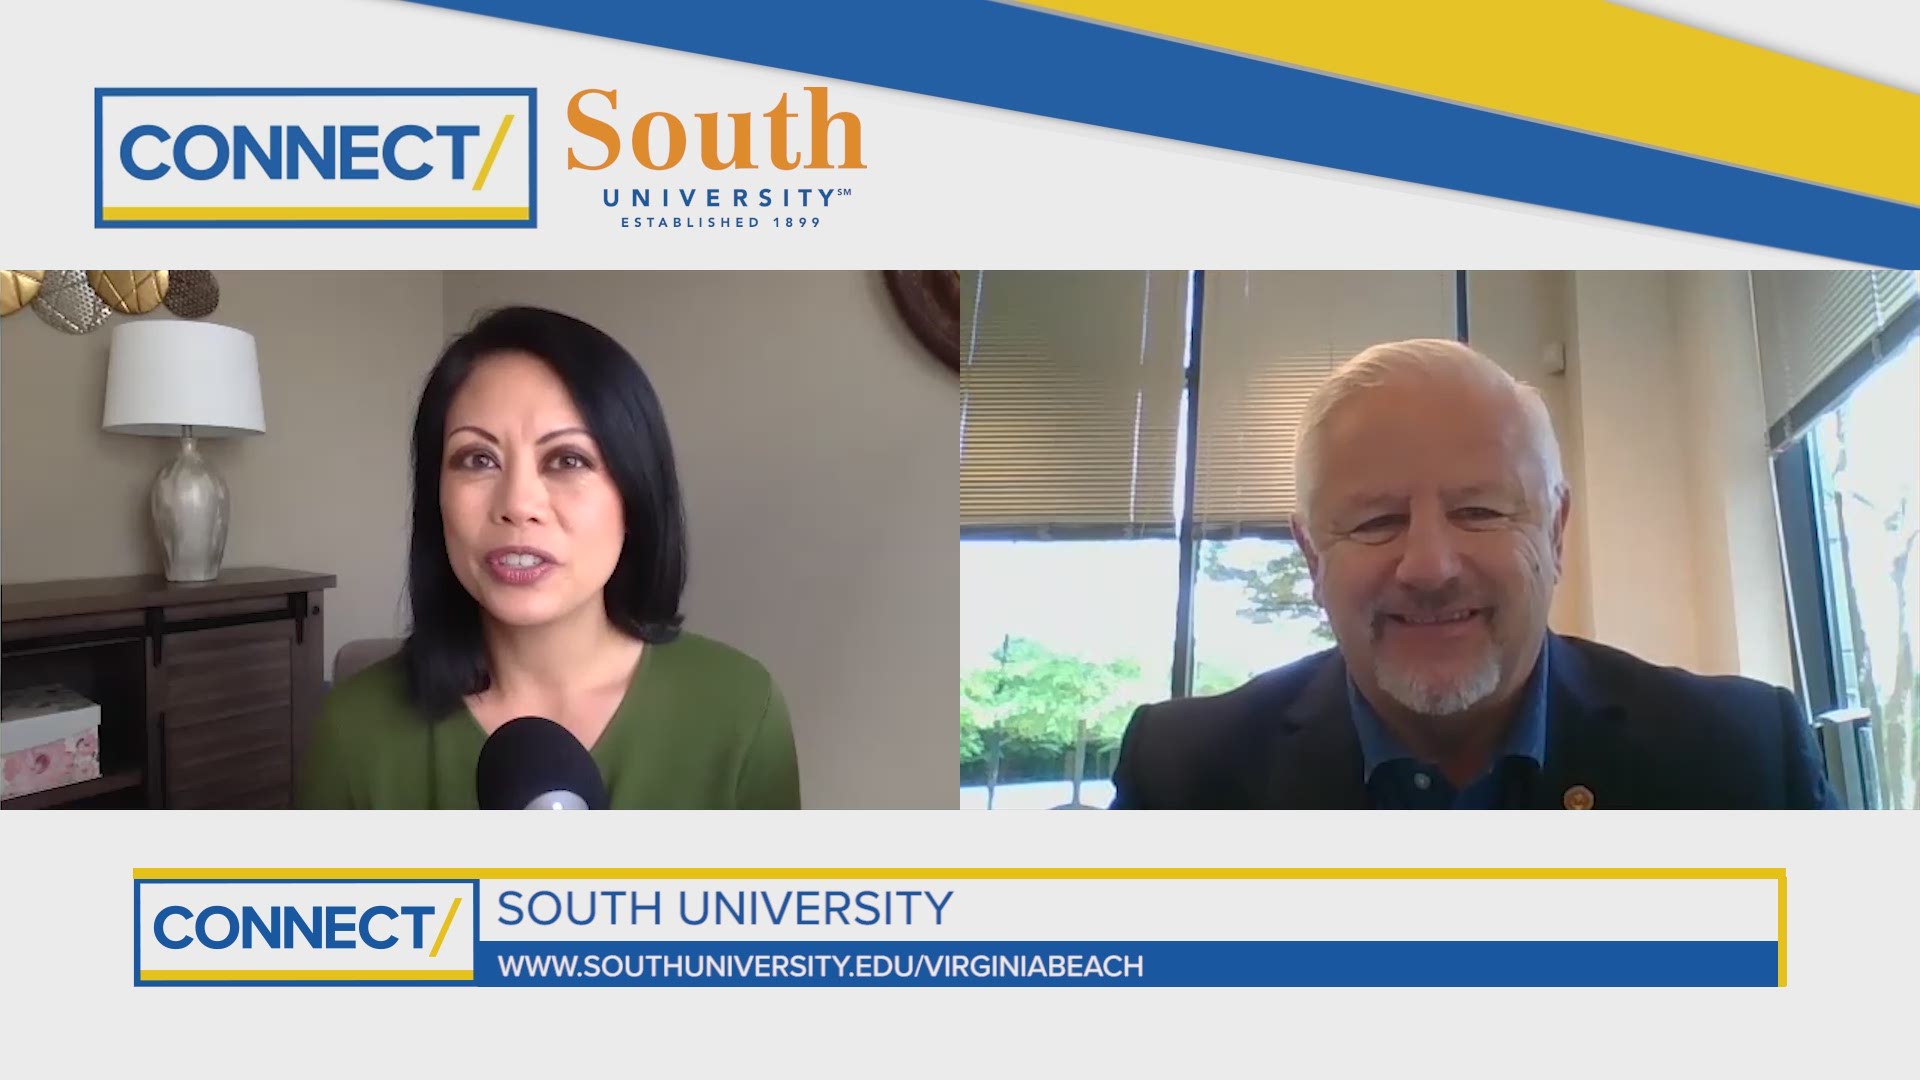 In this edition of CONNECT, you'll find out more about the summer session at South University. The school has a location in Virginia Beach.